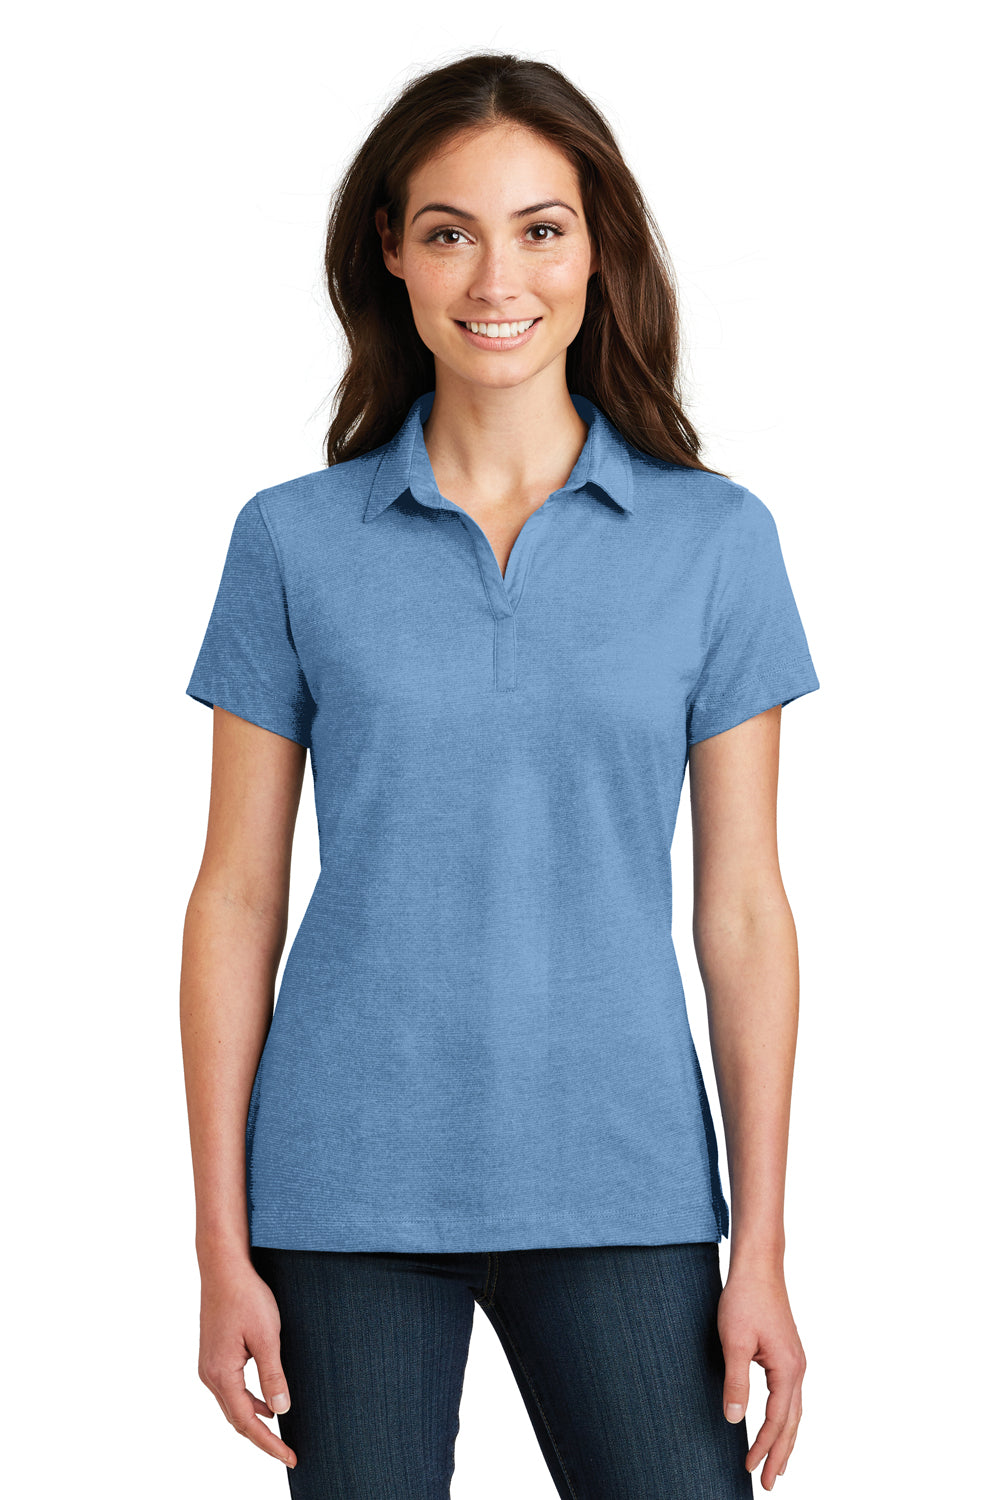 Port Authority L577 Womens Meridian Short Sleeve Polo Shirt Blue Skies Front